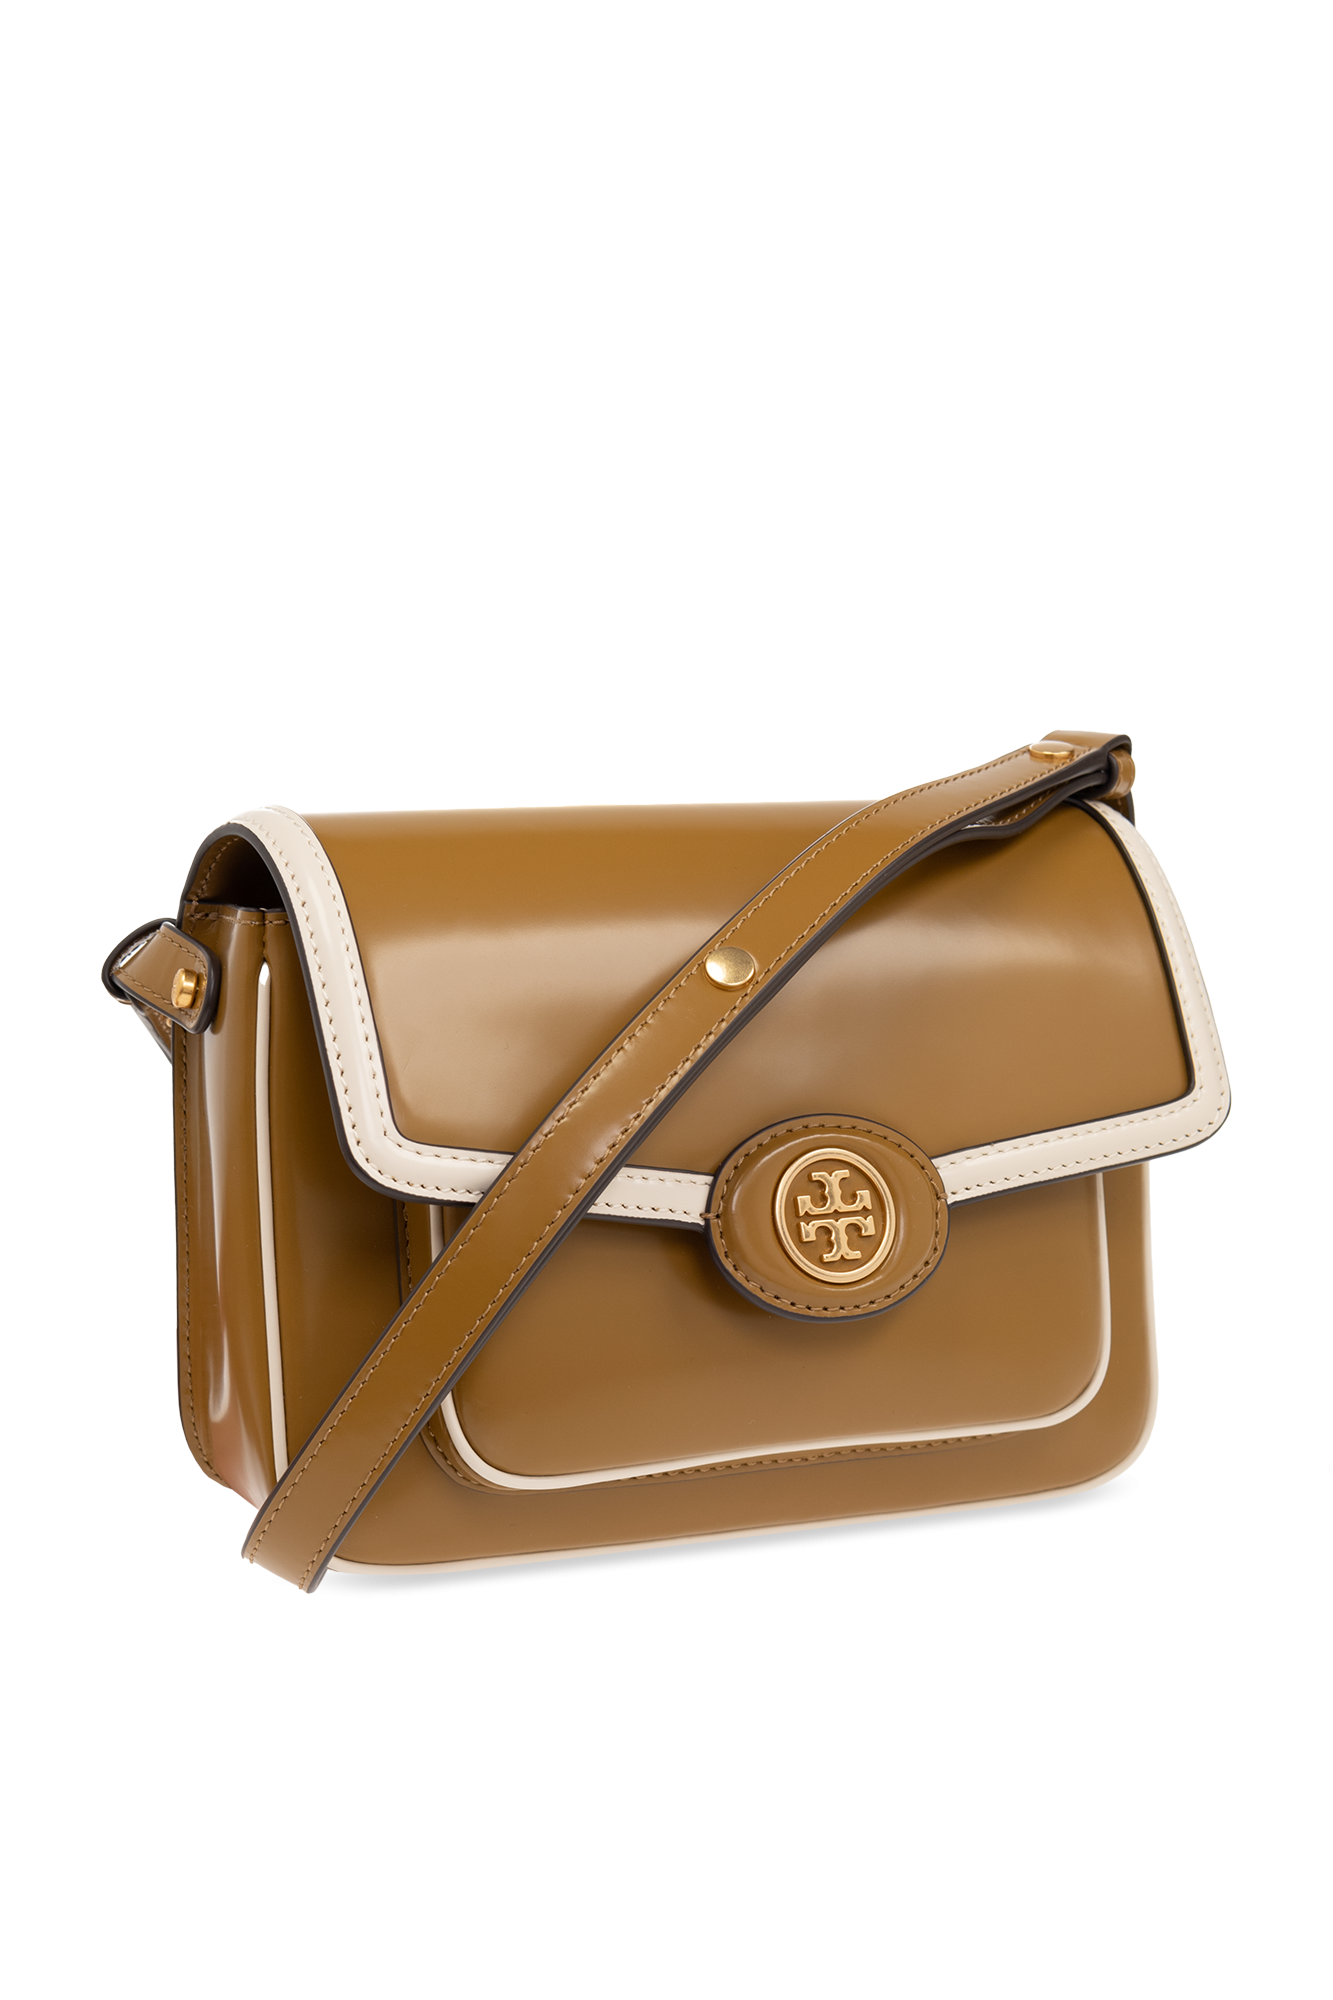 Robinson Convertible Shoulder Bag by Tory Burch Accessories for $43